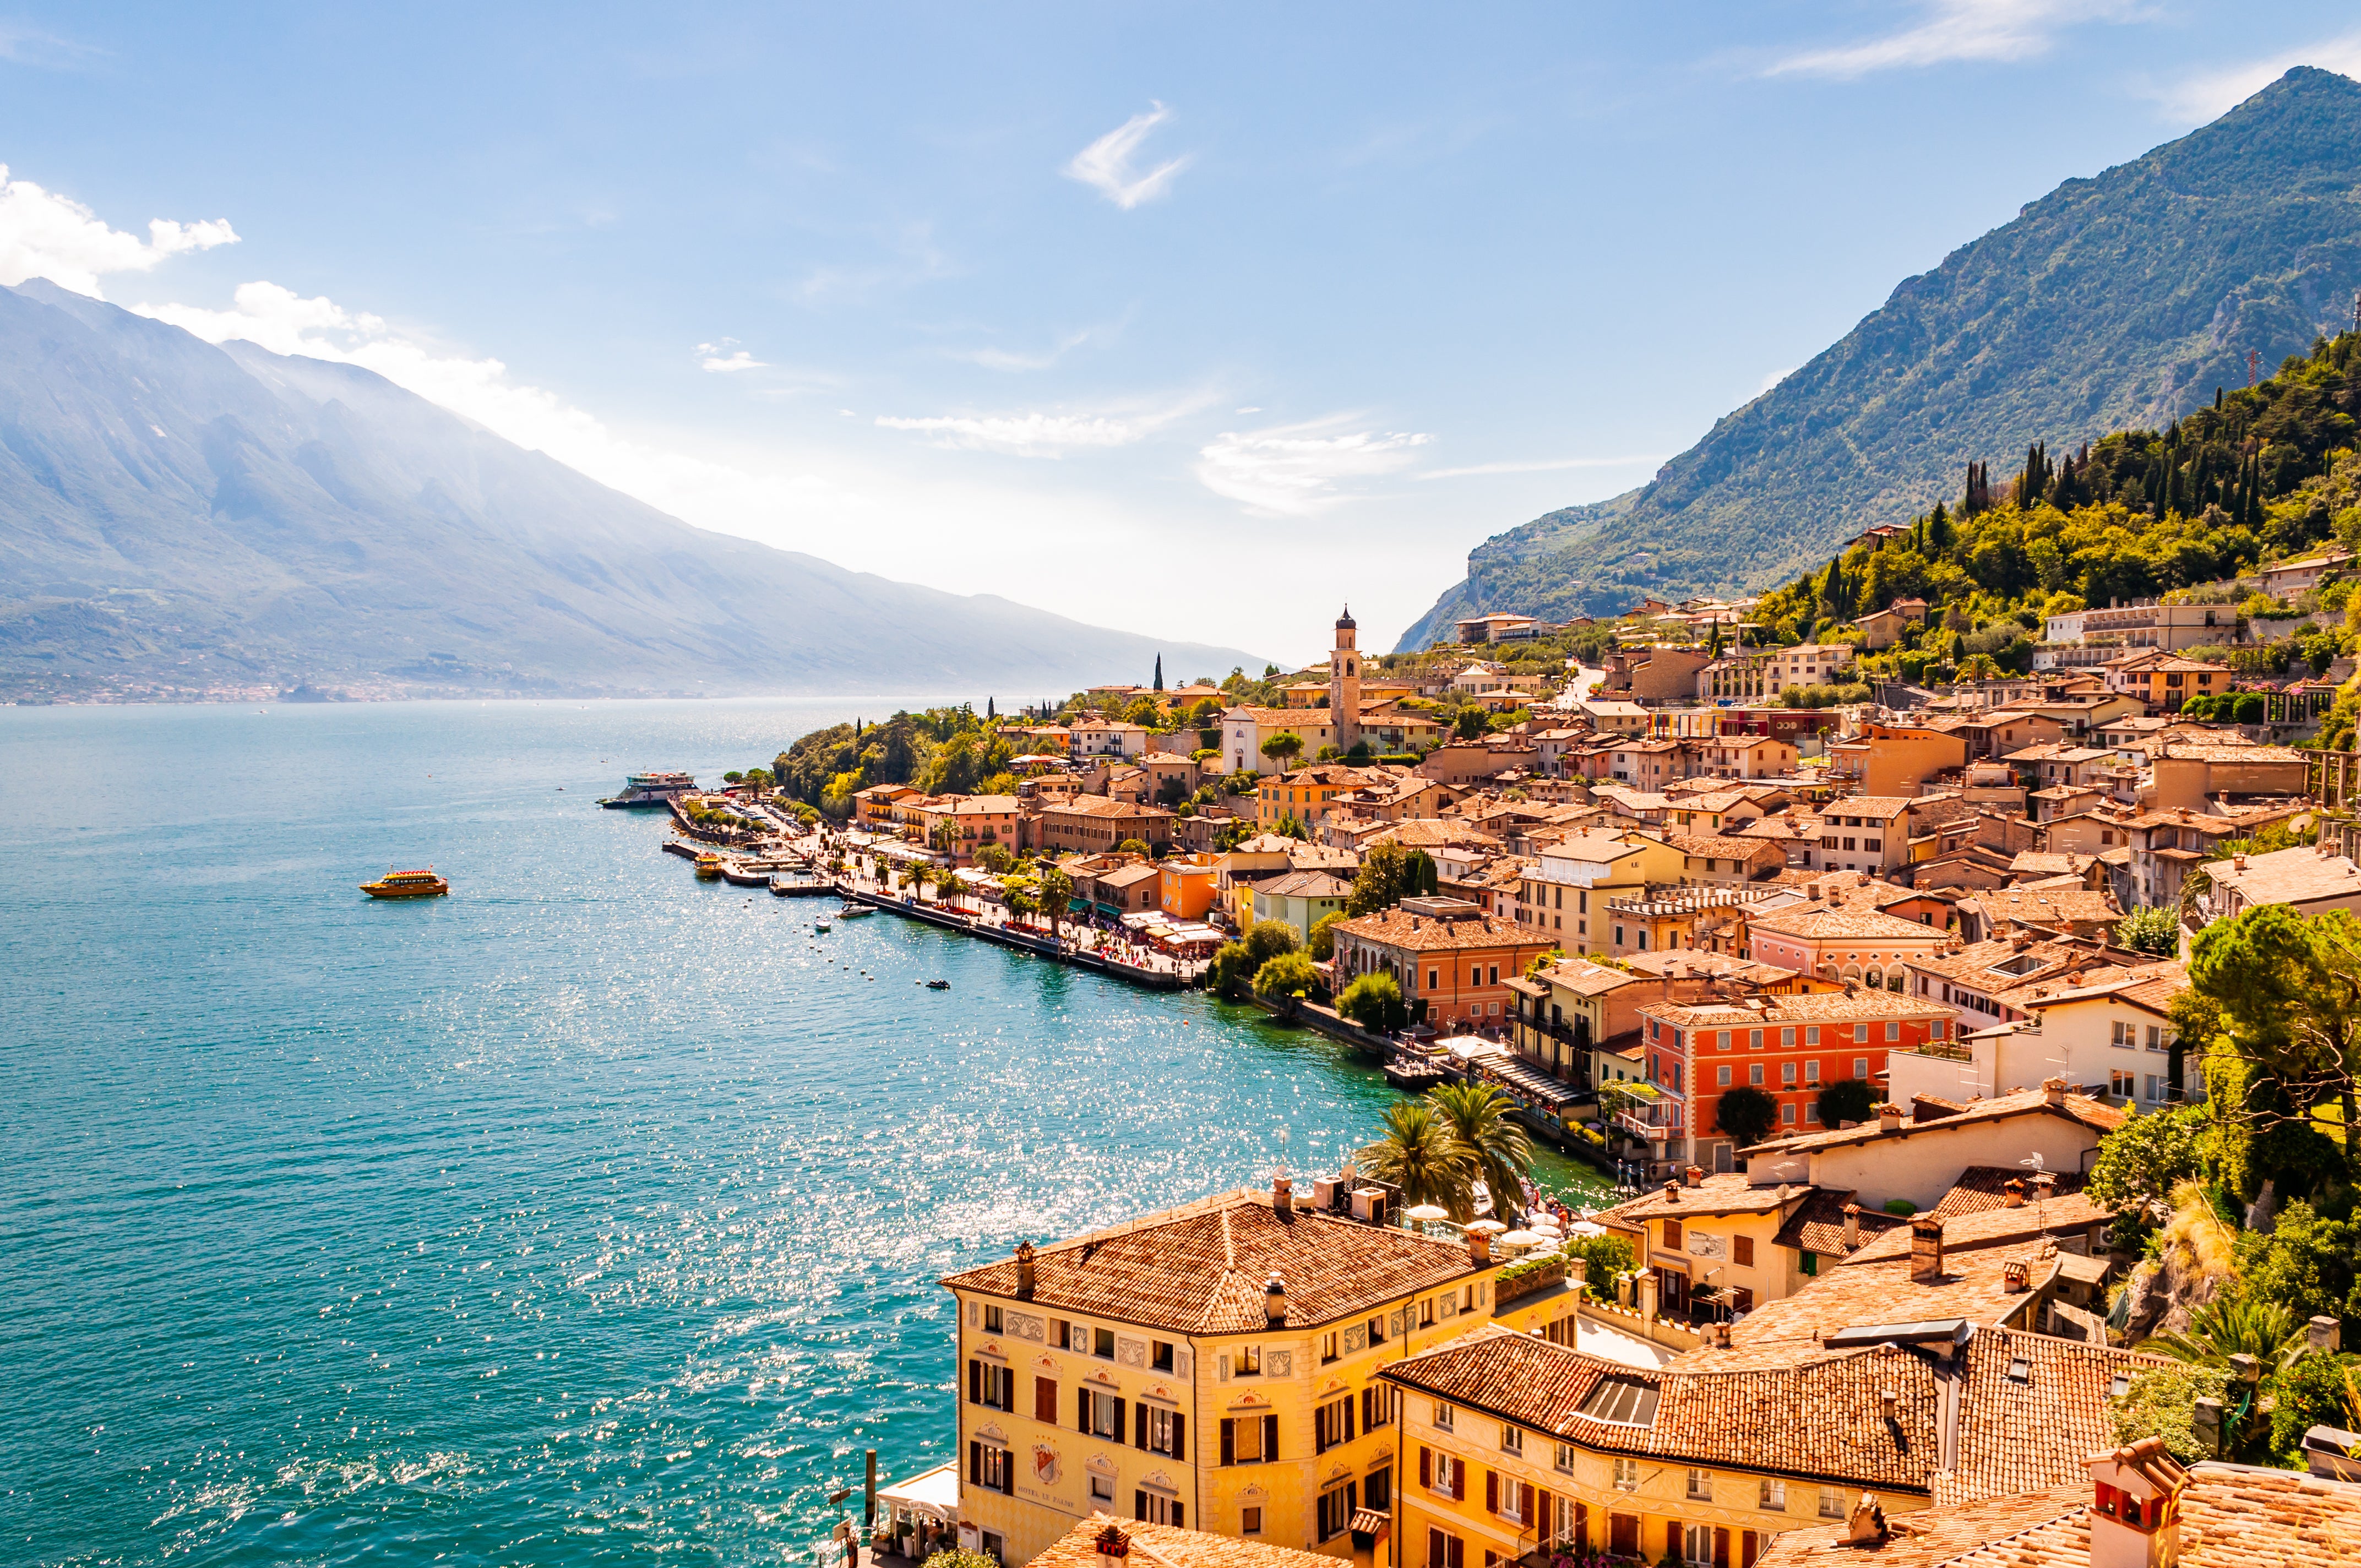 The accident took place on the shores of Navazzo di Gargnano in northern Italy, a popular area to visit by Lake Garda